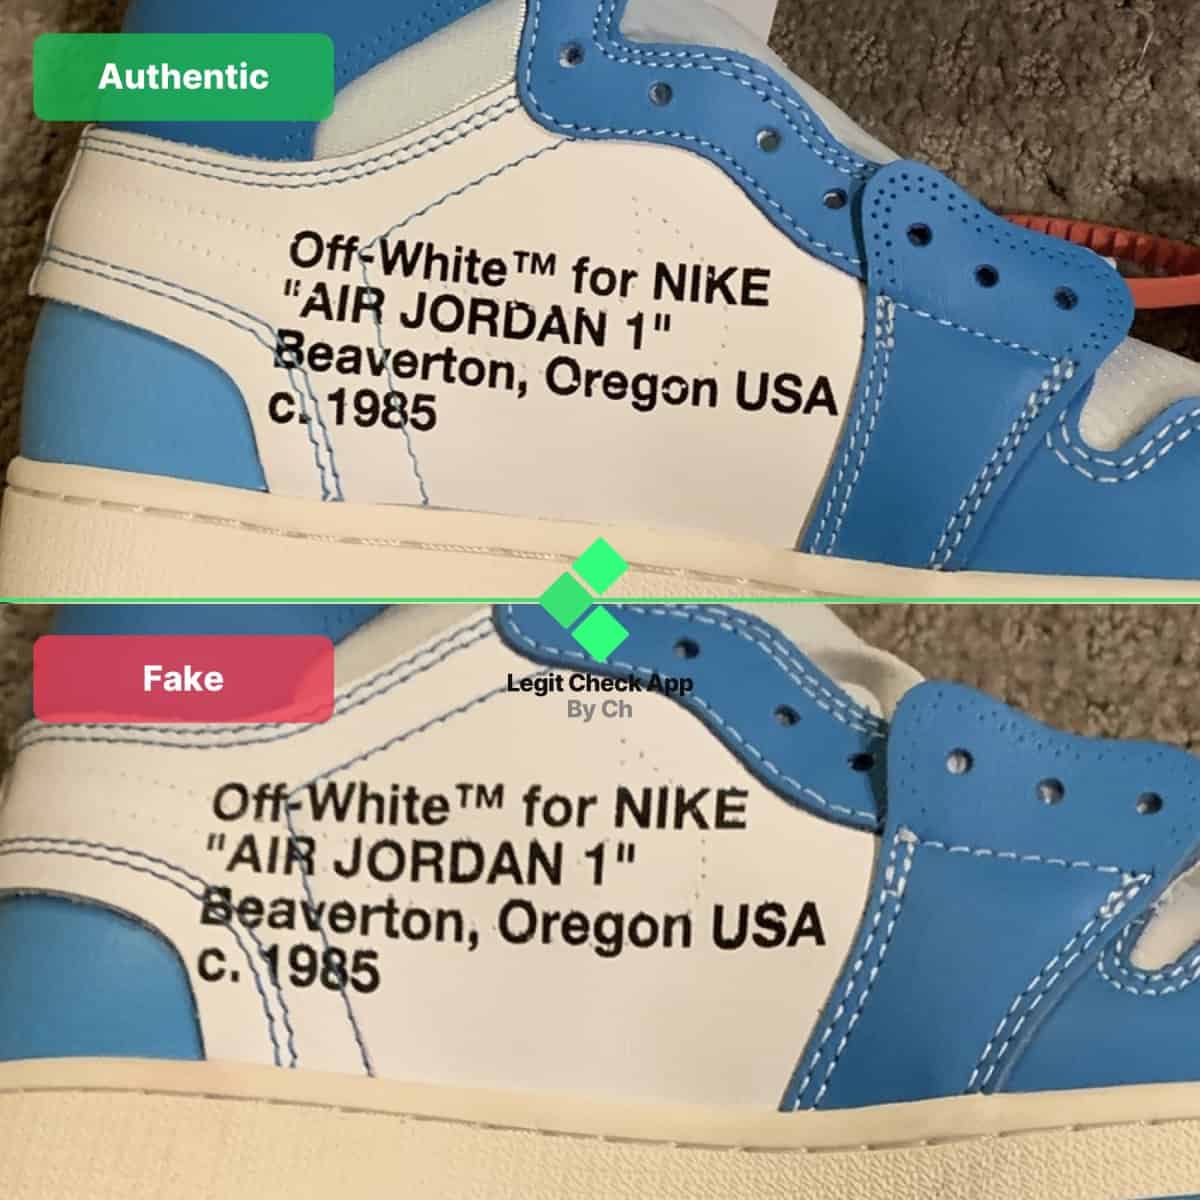 How To Tell Fake Off-White Air Jordan 1 UNC